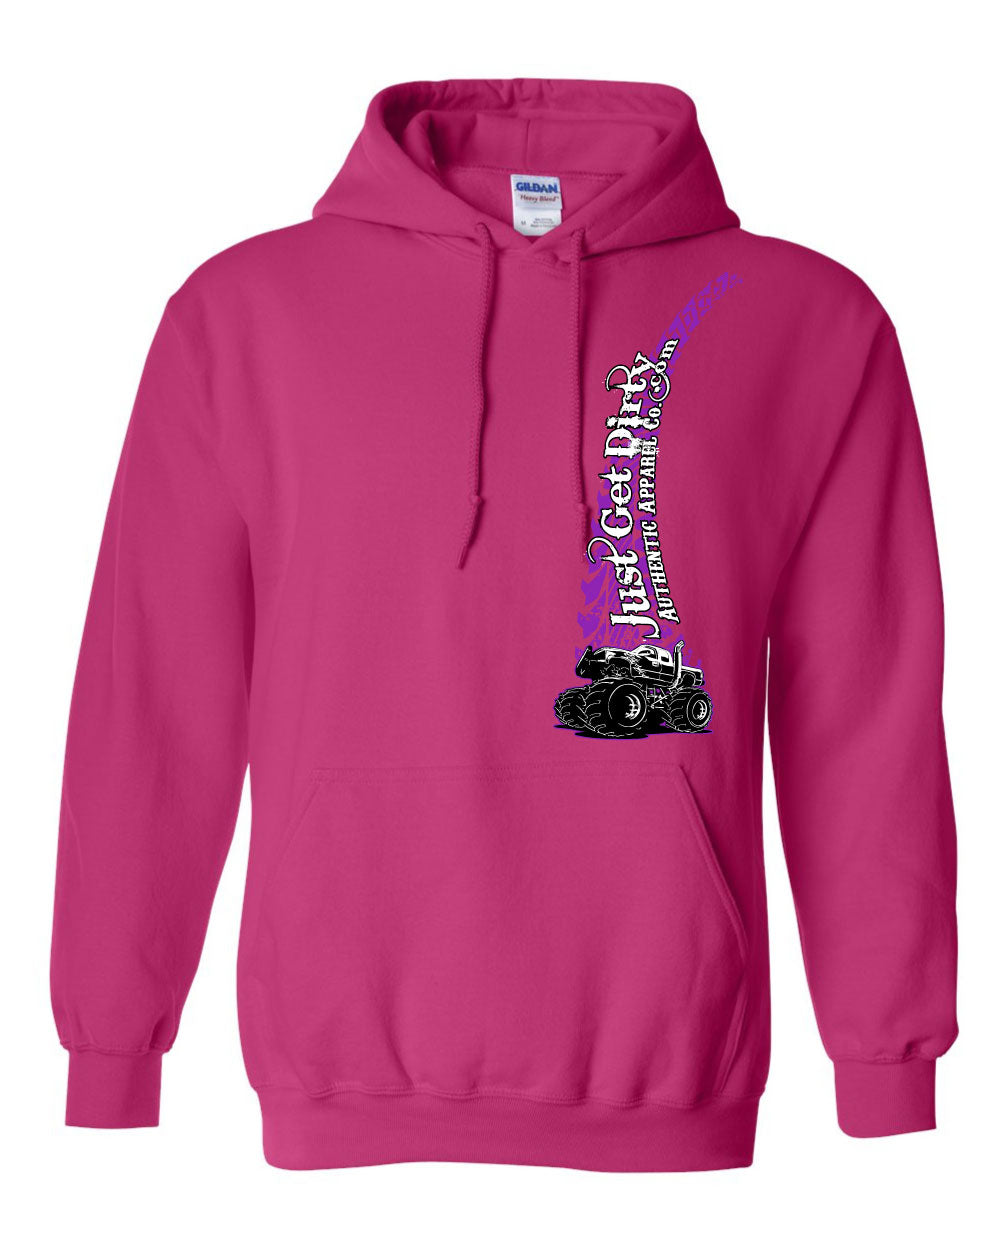 Just_Get_Dirty_Pink_Women_s_Hoodie_front